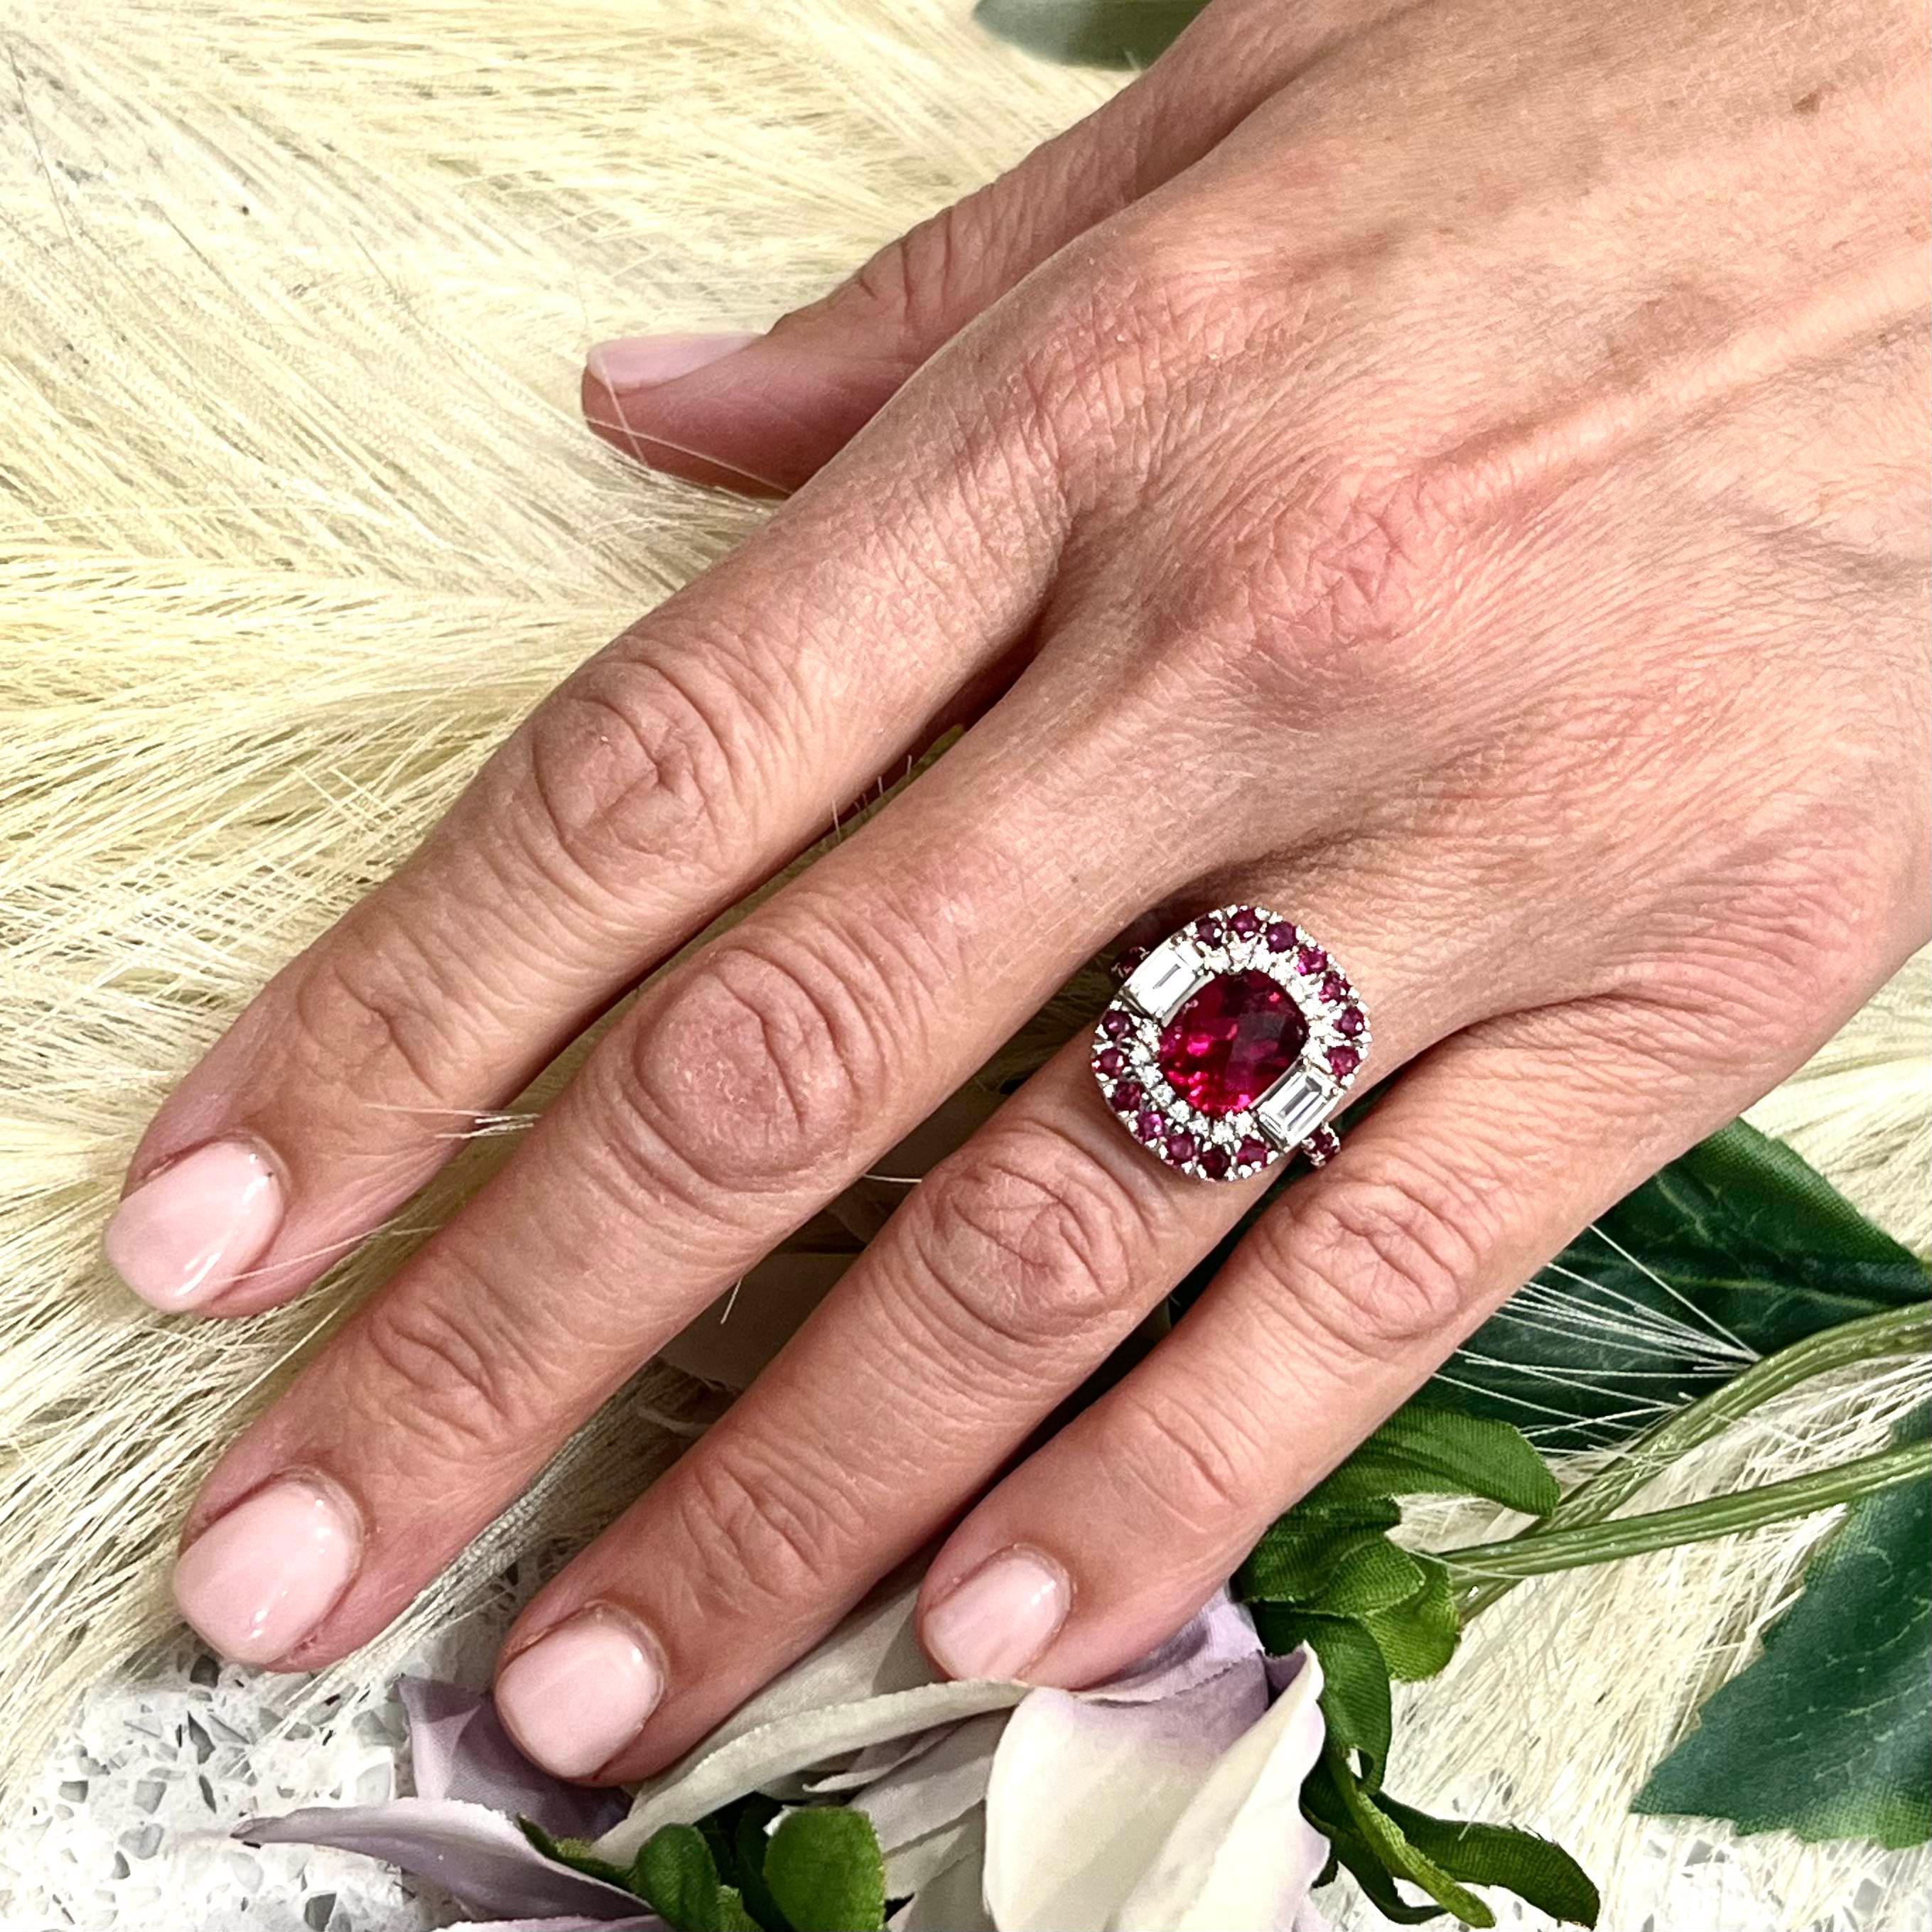 Natural Finely Faceted Quality Tourmaline Ruby Sapphire Diamond Ring 14k Gold 5.1 TCW GIA Certified $12,750 210737

This is a Unique Custom Made Glamorous Piece of Jewelry!

Nothing says, “I Love you” more than Diamonds and Pearls!

This Tourmaline